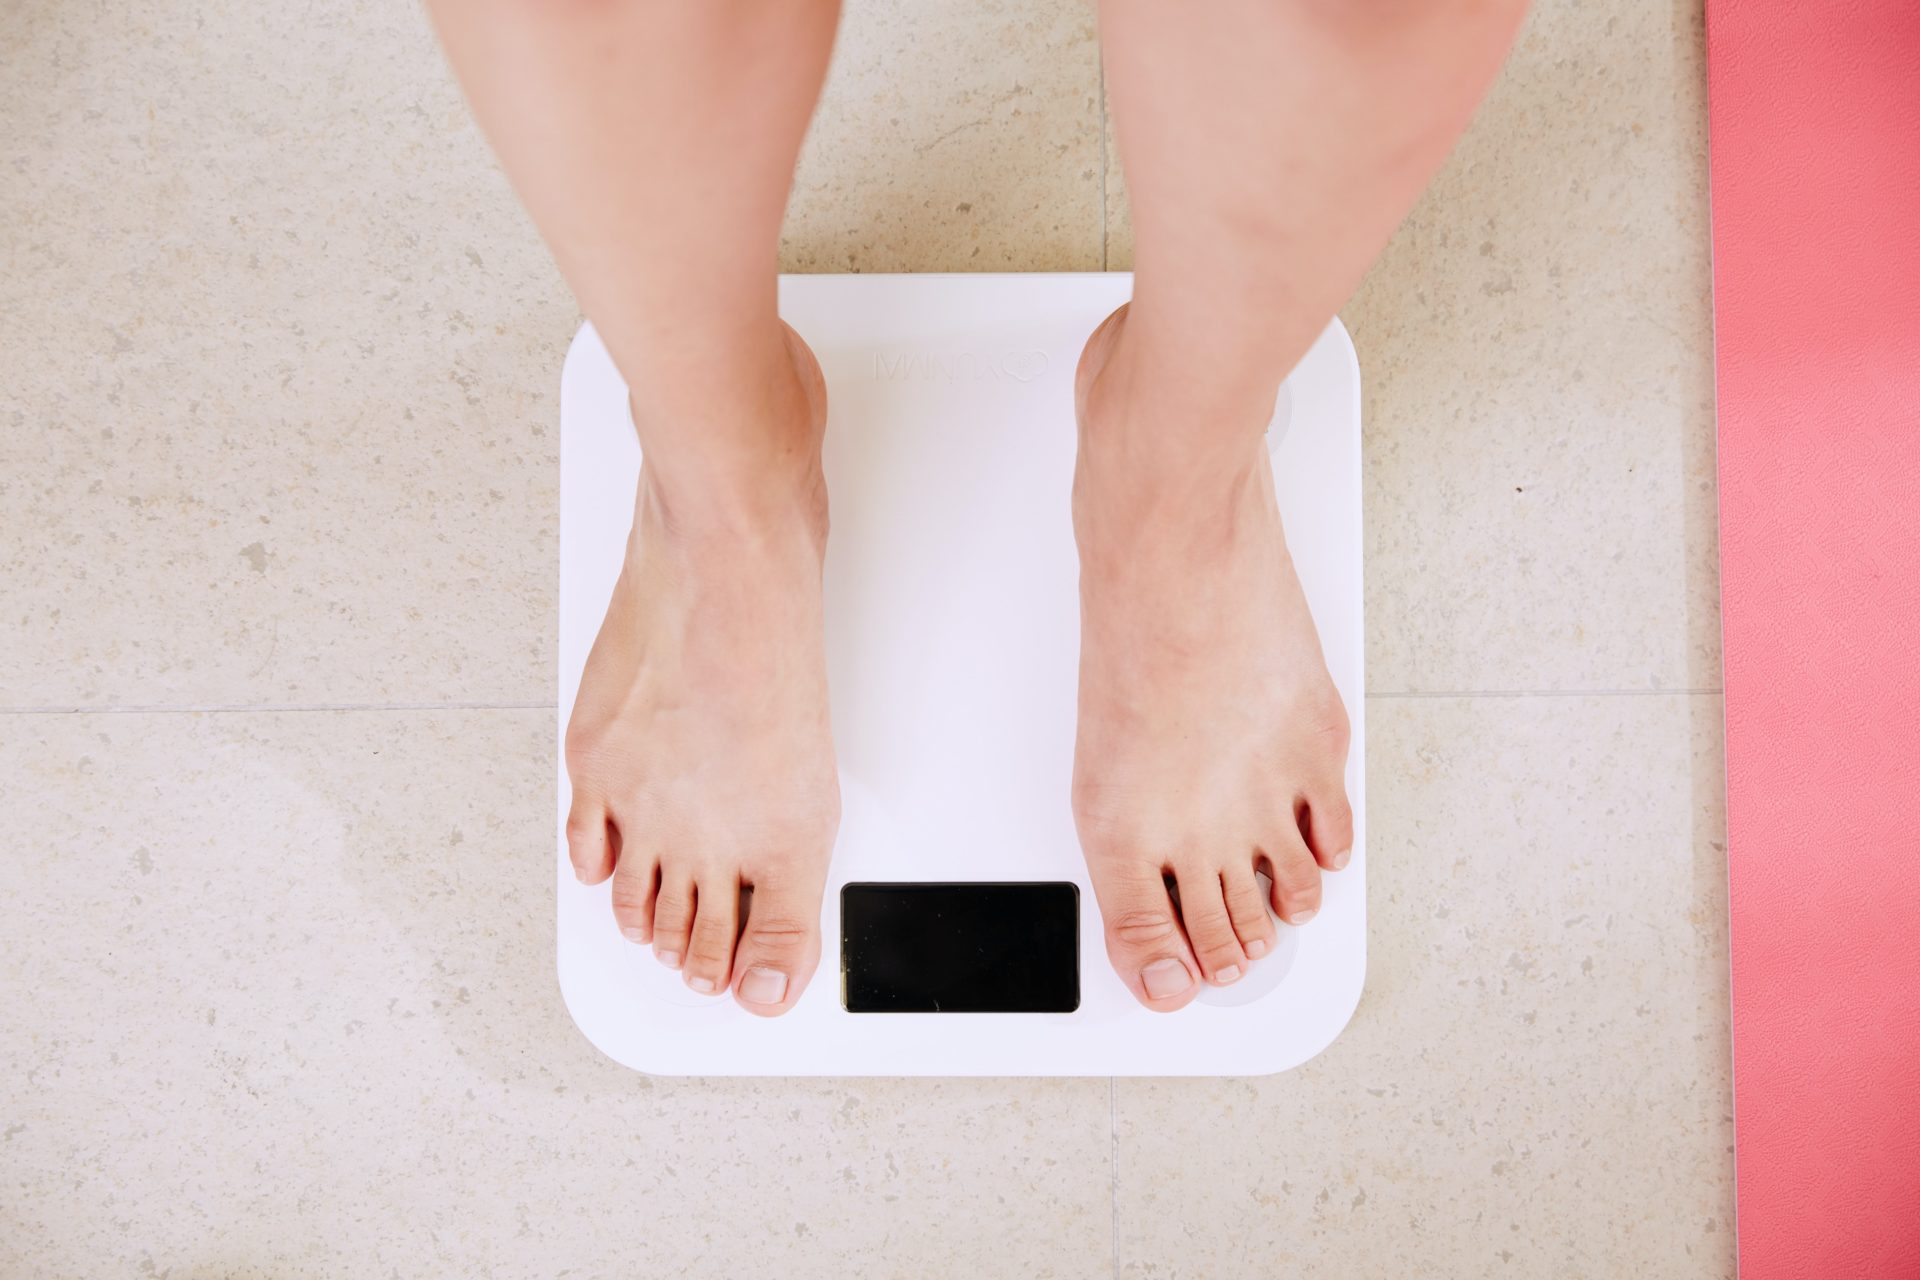 How to enter your weight in the app